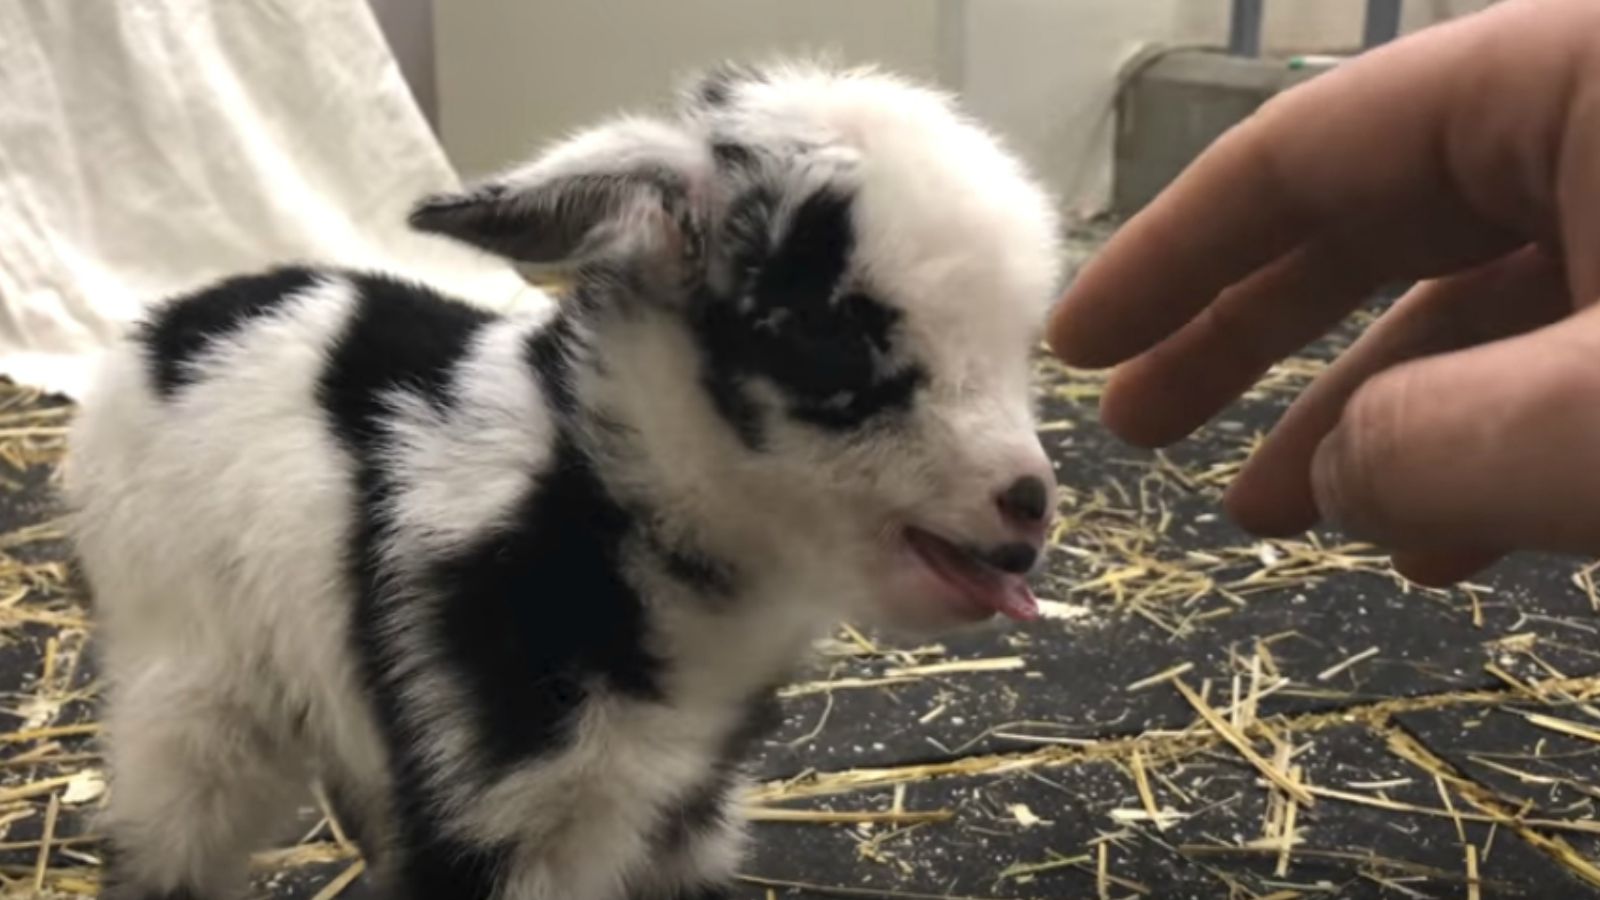 Tiny Baby Goat Makes the Cutest Noise When His Human Stops Petting Him